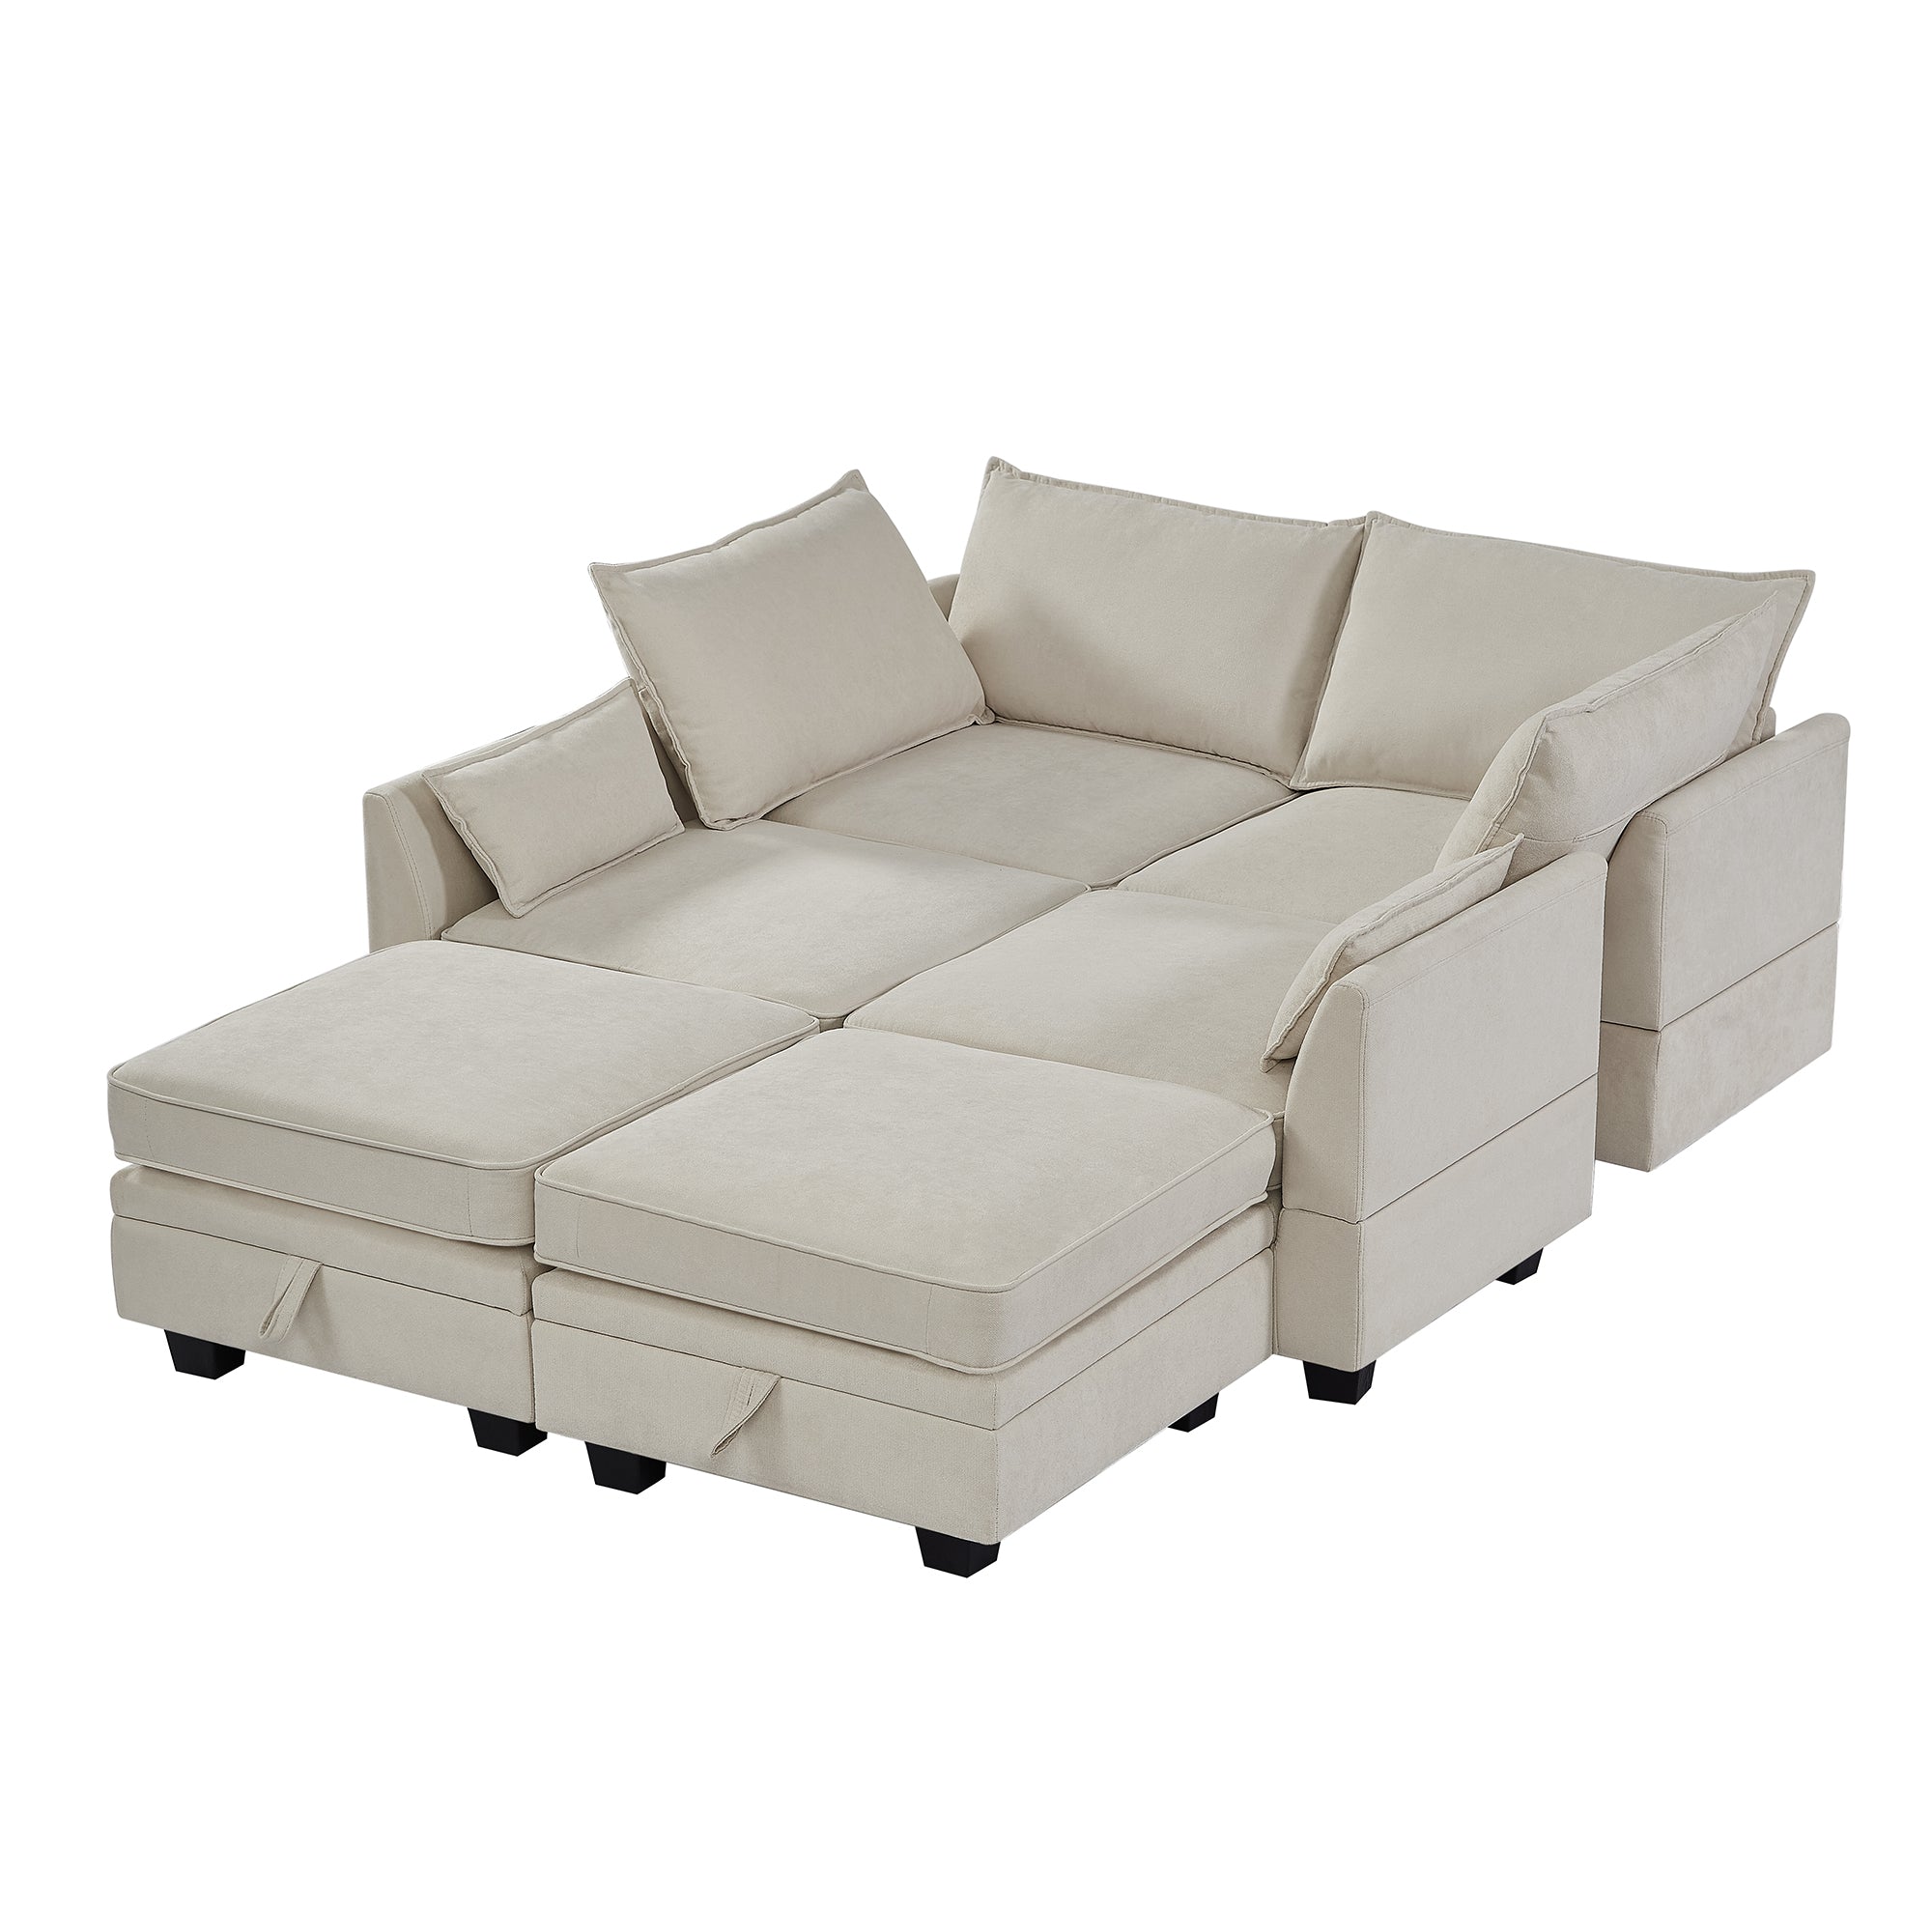 Bellemave 115" Modern Large U-Shape Modular Sectional Sofa, Convertible Sofa Bed with Reversible Chaise